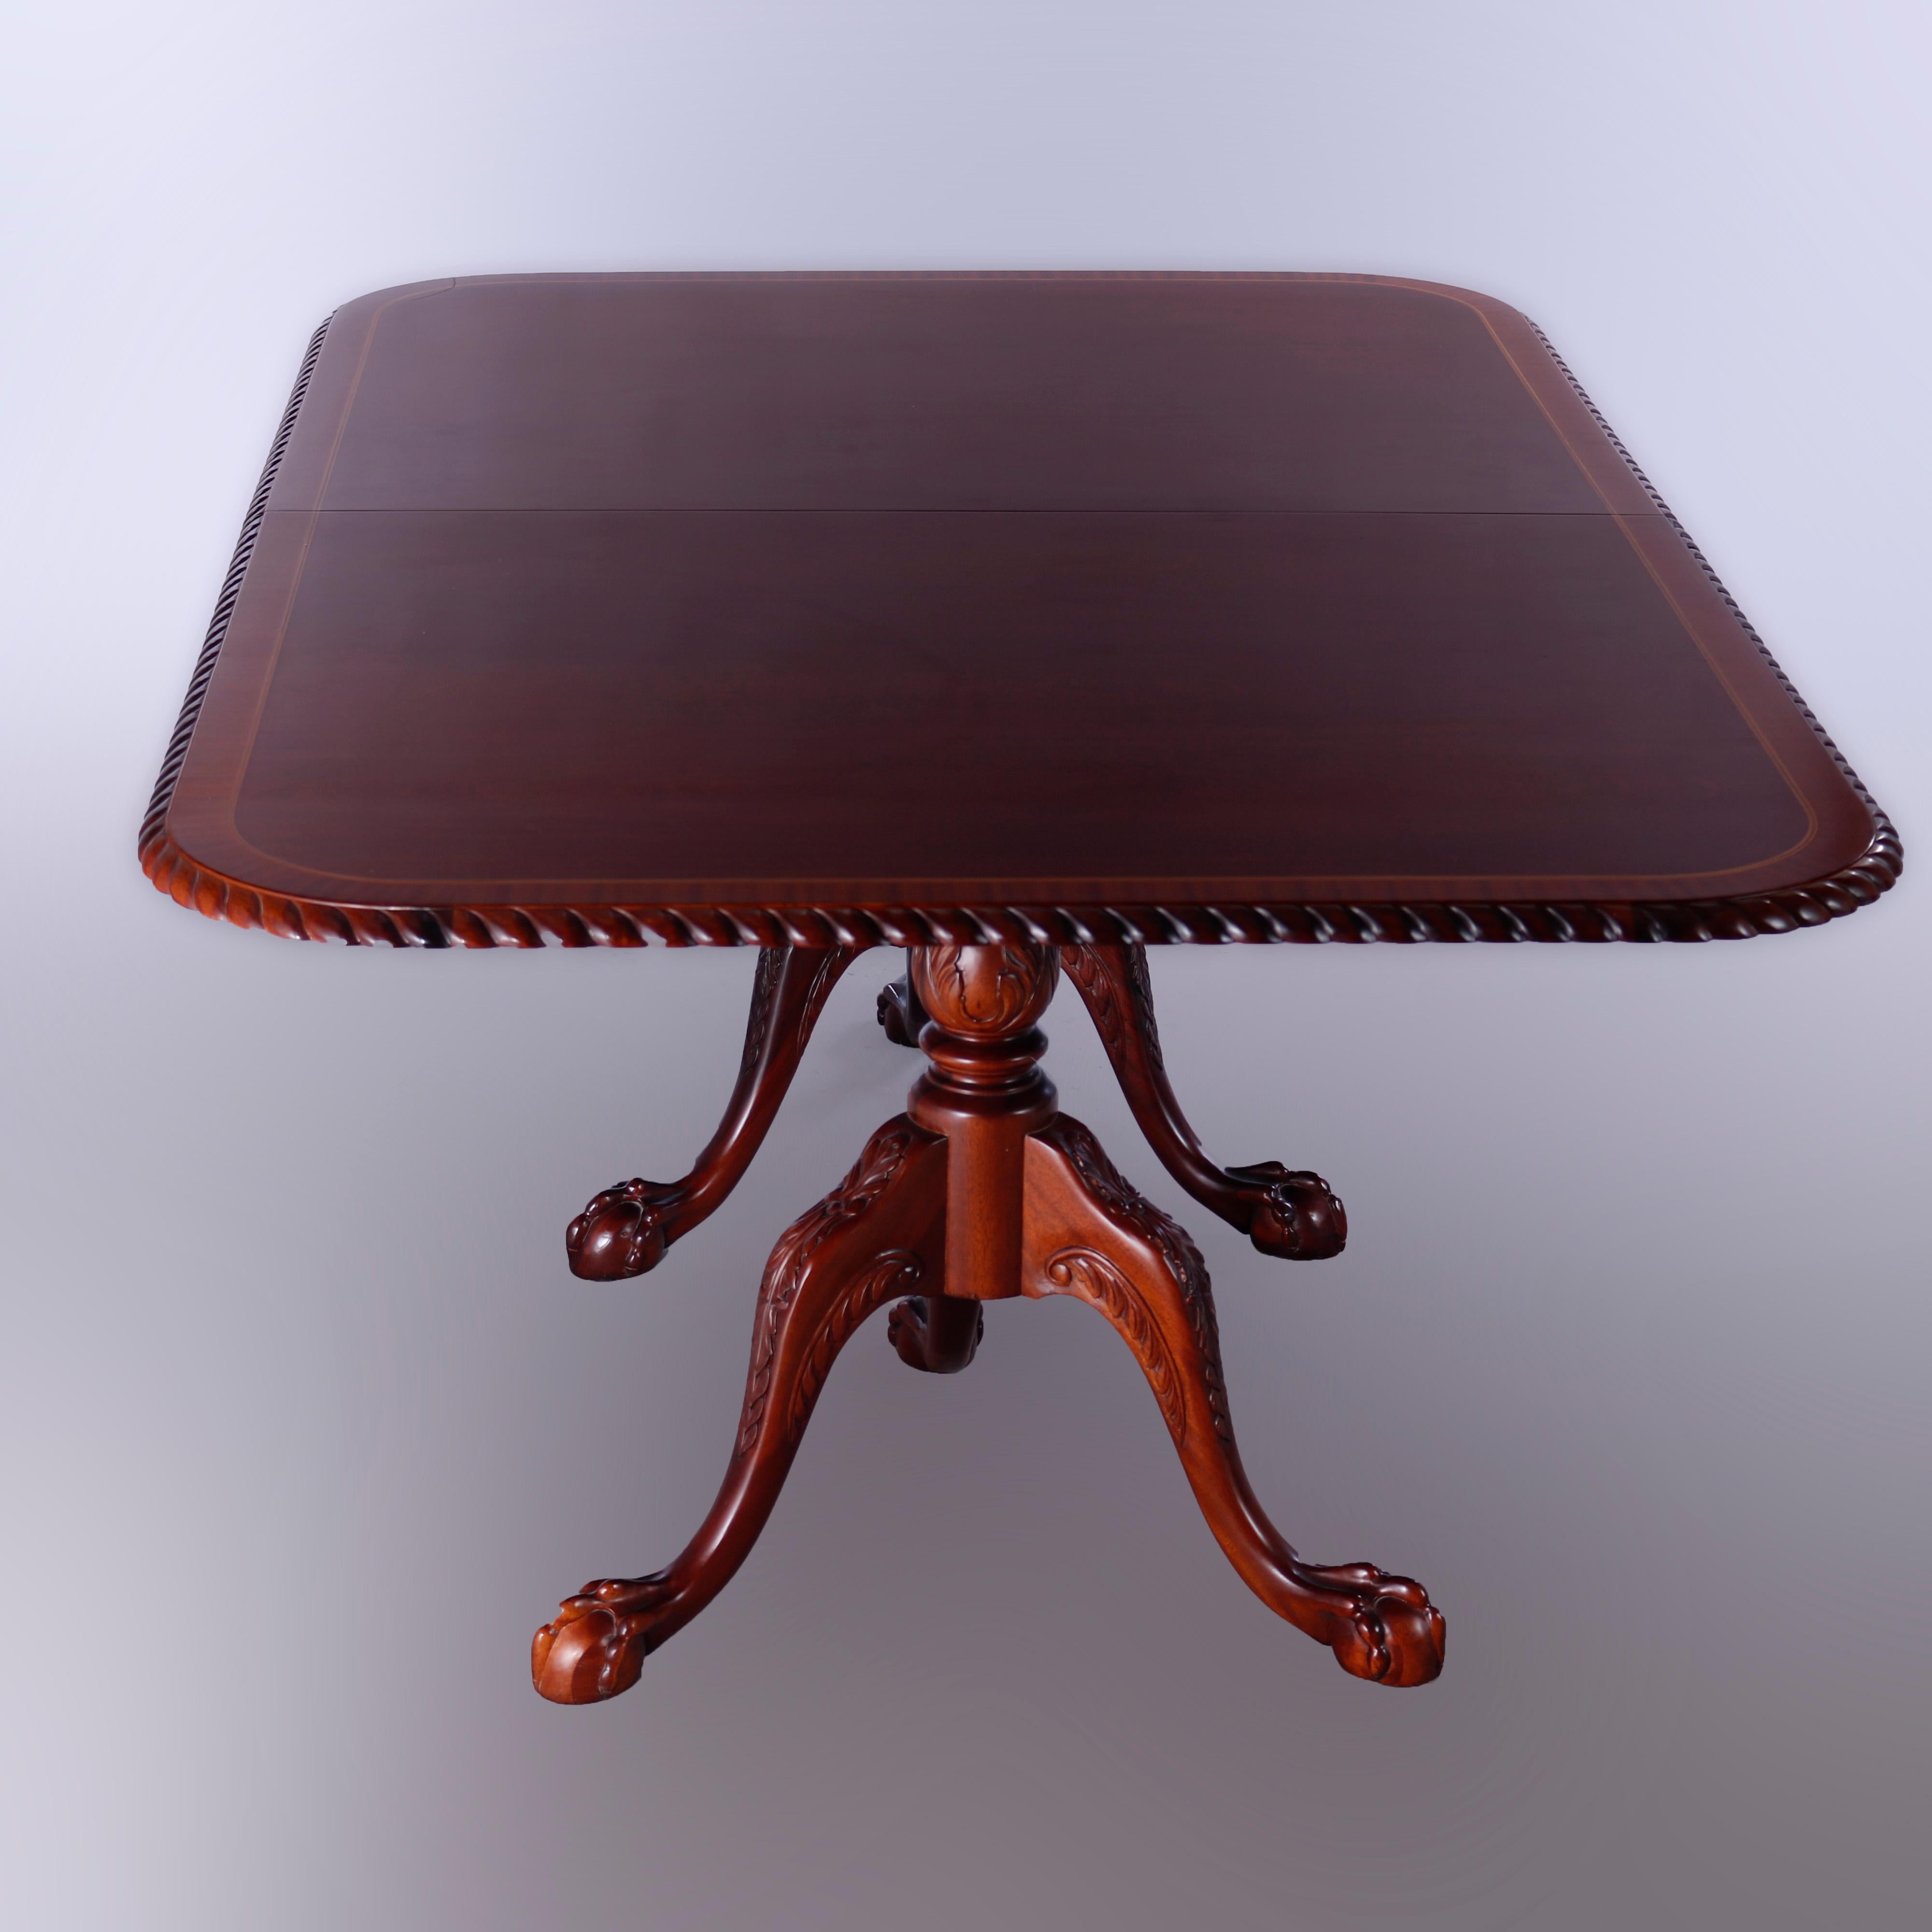 A Chippendale style dining table offers mahogany construction with cross banded top having rounded corners and carved gadrooned edge bordering, raised on double pedestals with cabriole legs terminating in claw and ball feet, extends to accept single